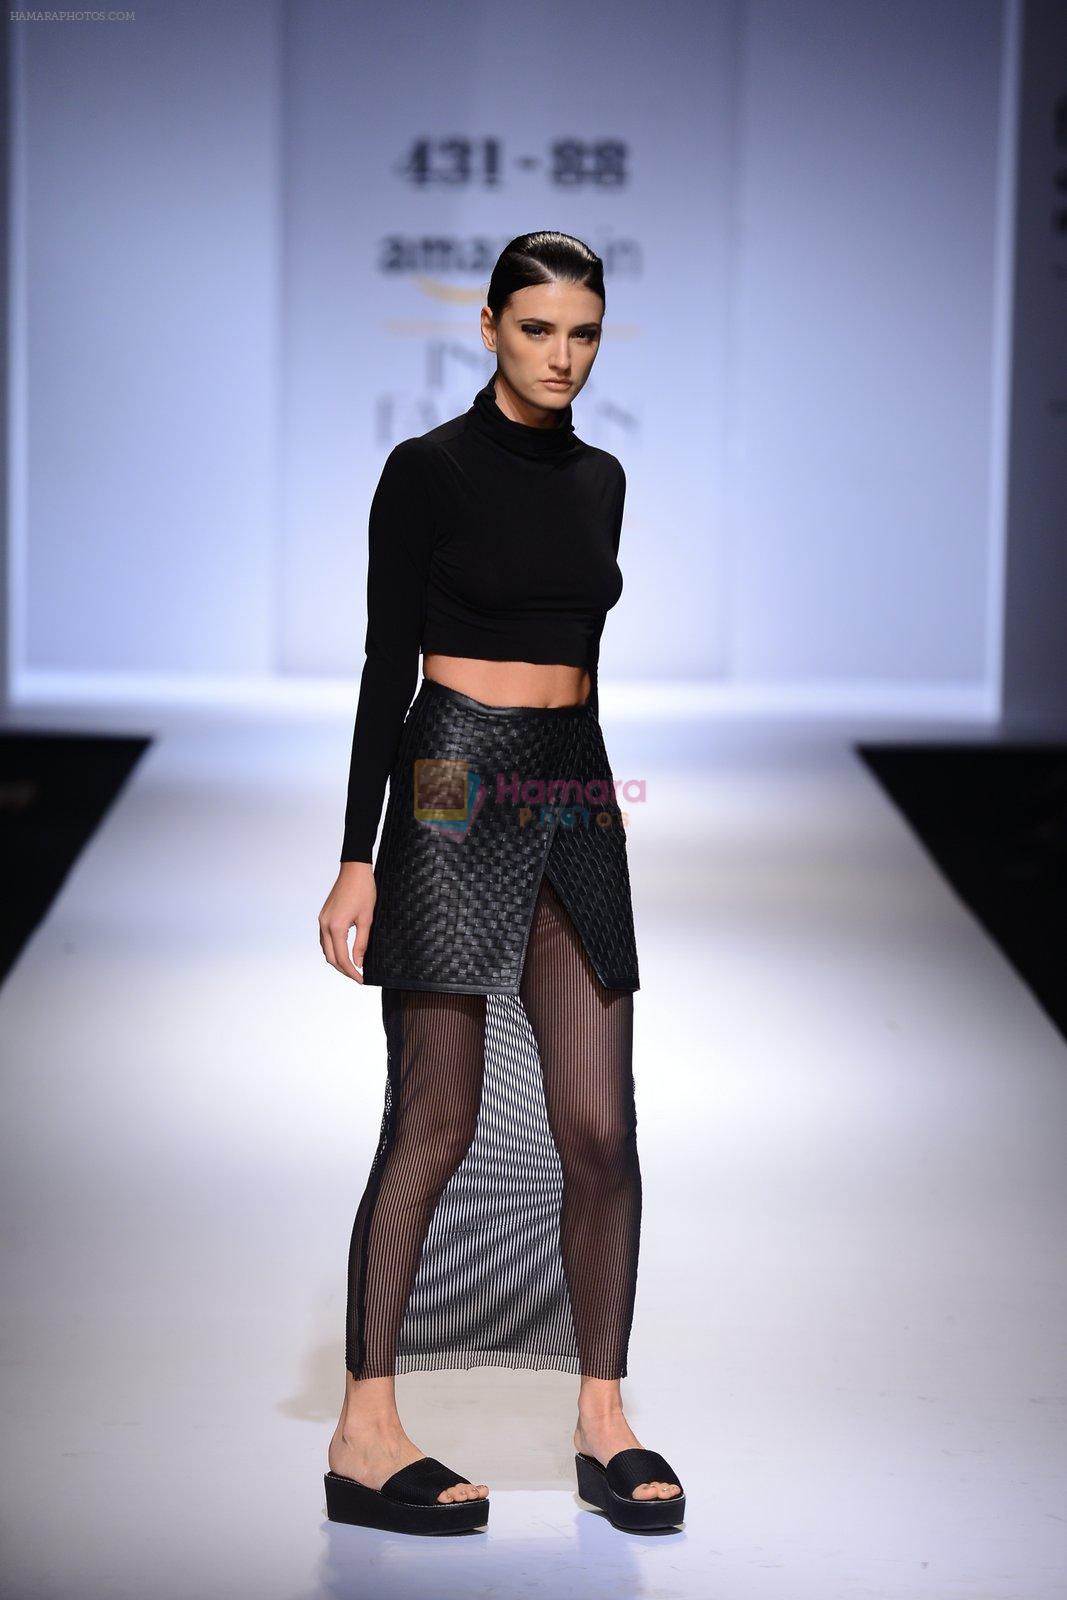 Model walk the ramp for Shweta Kapur on day 4 of Amazon India Fashion Week on 28th March 2015